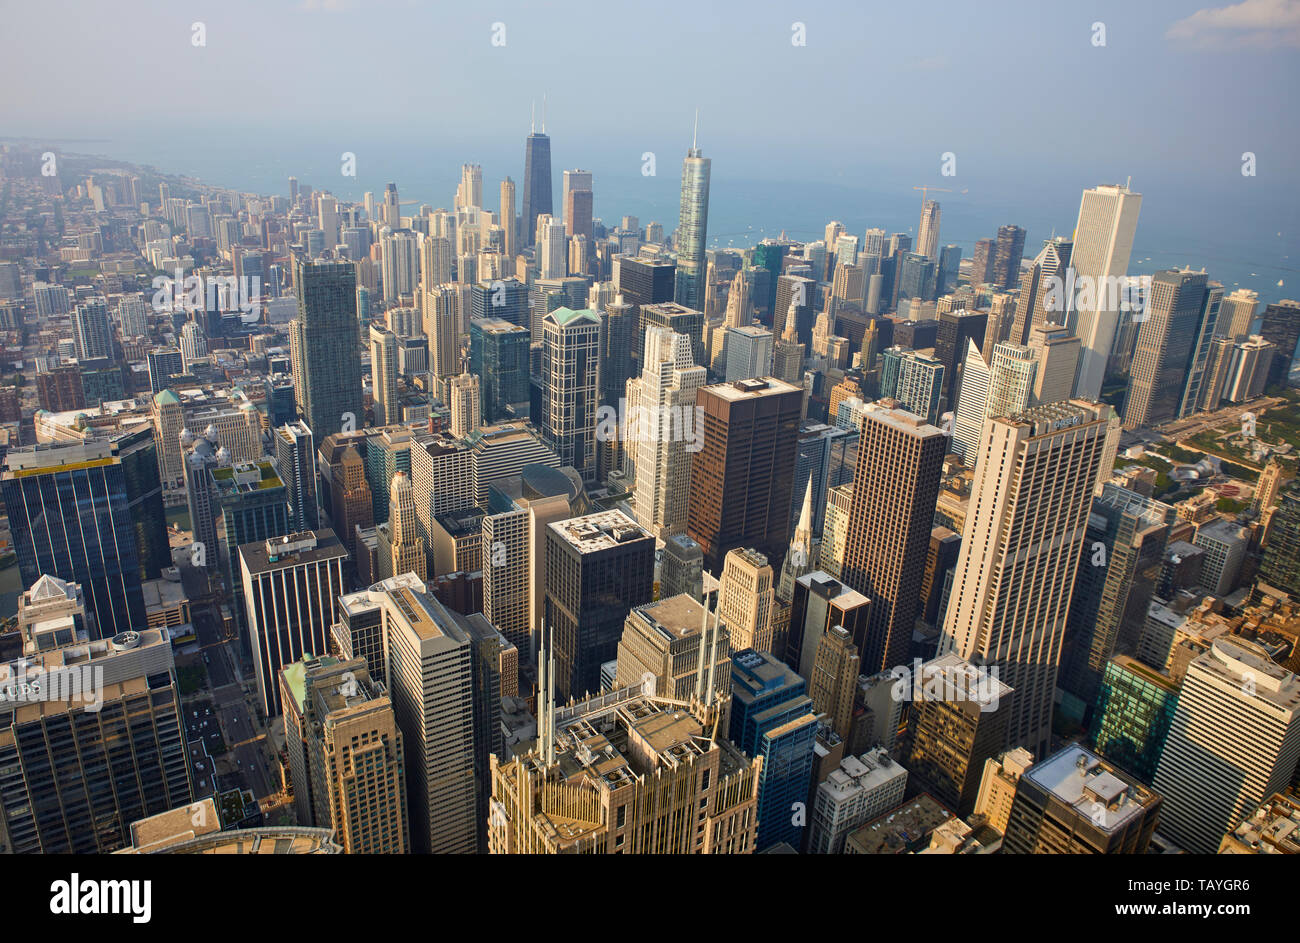 Elevated view of Chicago seen from Skydeck, Chicago, Illinois, United States Stock Photo